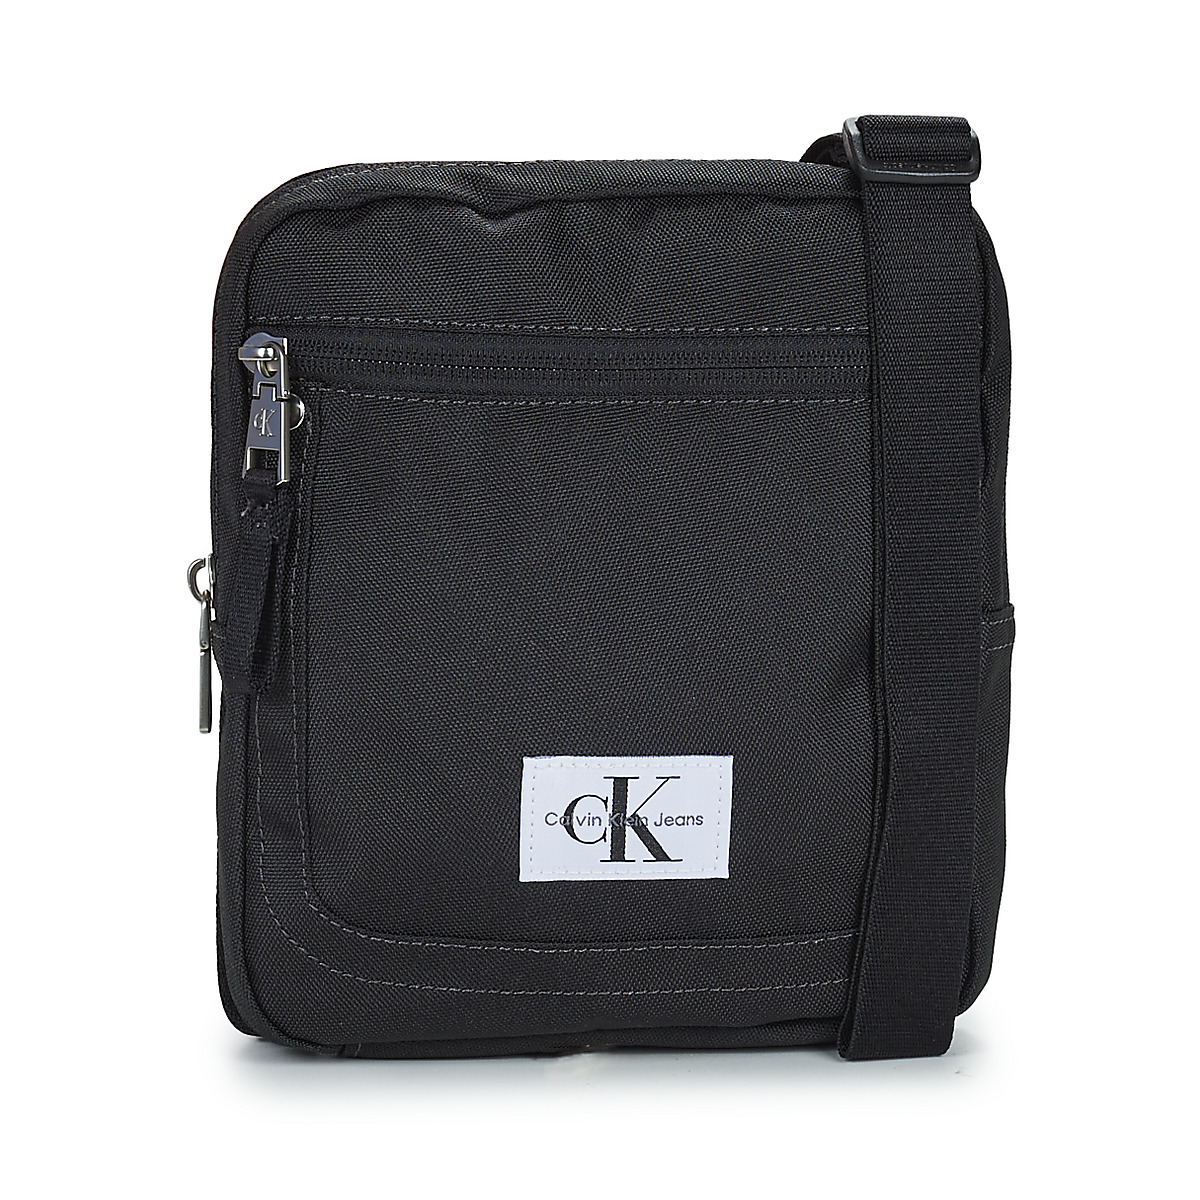 Calvin Klein Jeans SPORT ESSENTIALS REPORTER18 W Black - Free delivery |  Spartoo NET ! - Bags Pouches / Clutches Men